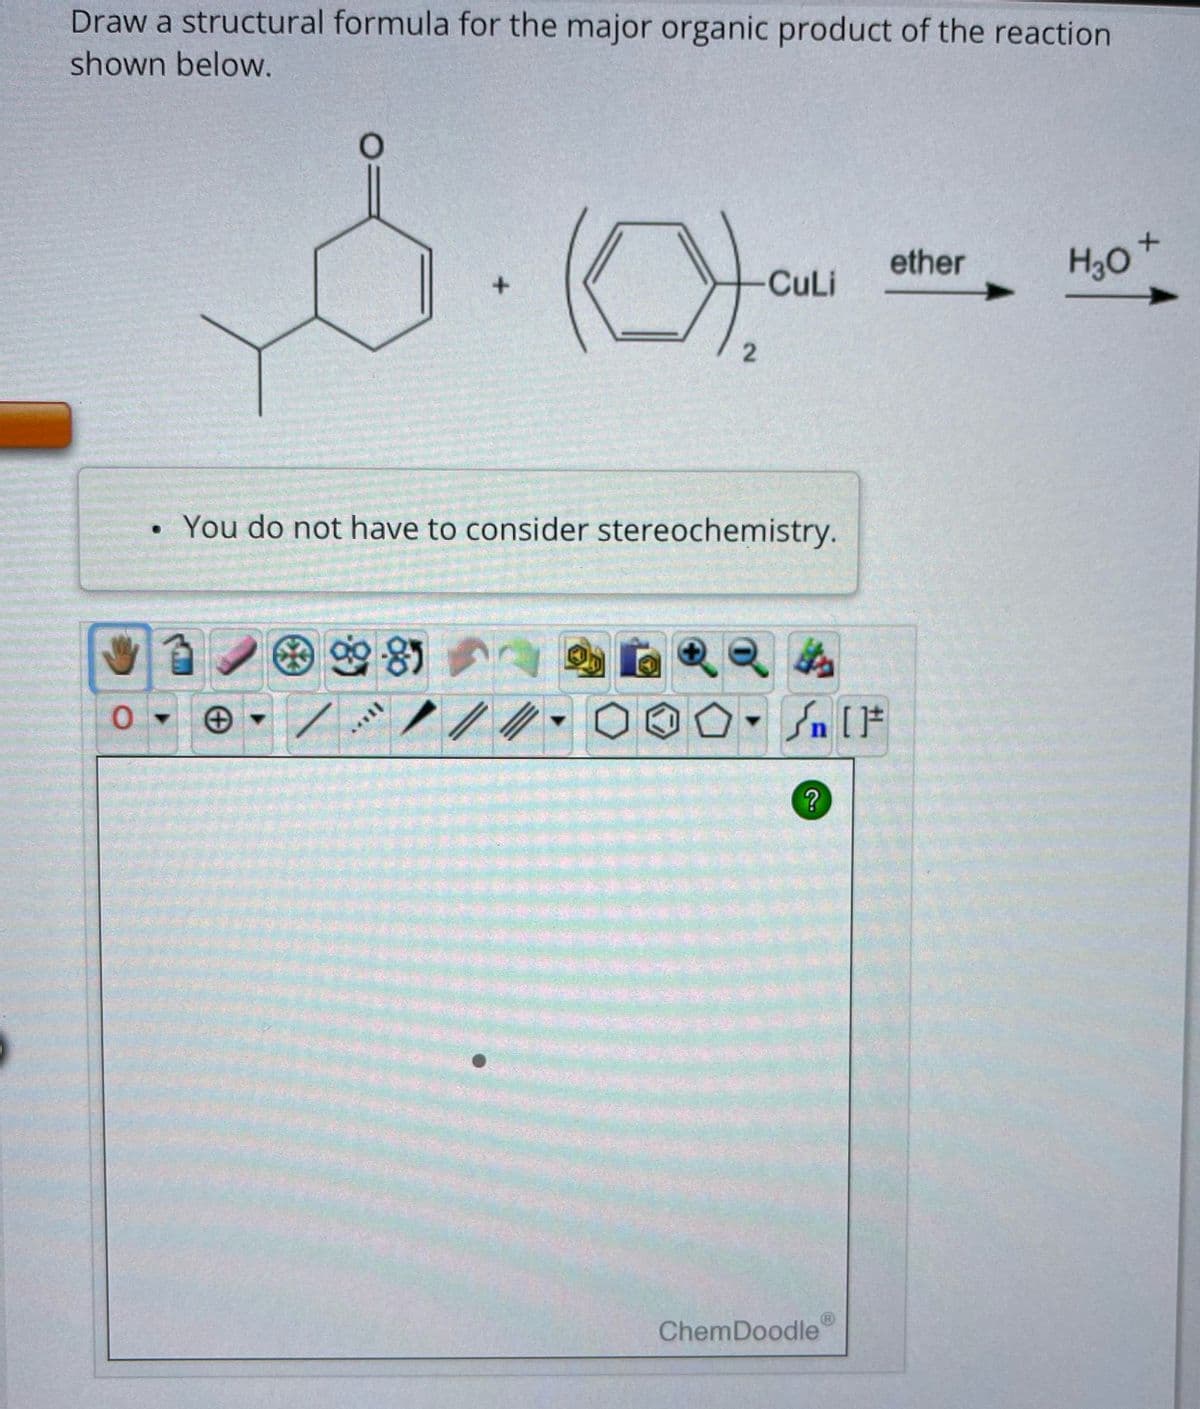 Draw a structural formula for the major organic product of the reaction
shown below.
0
●
S
985
+
****|
You do not have to consider stereochemistry.
2)
2
//
CuLi
H
Sn [F
?
ChemDoodle
ether
H₂O
+